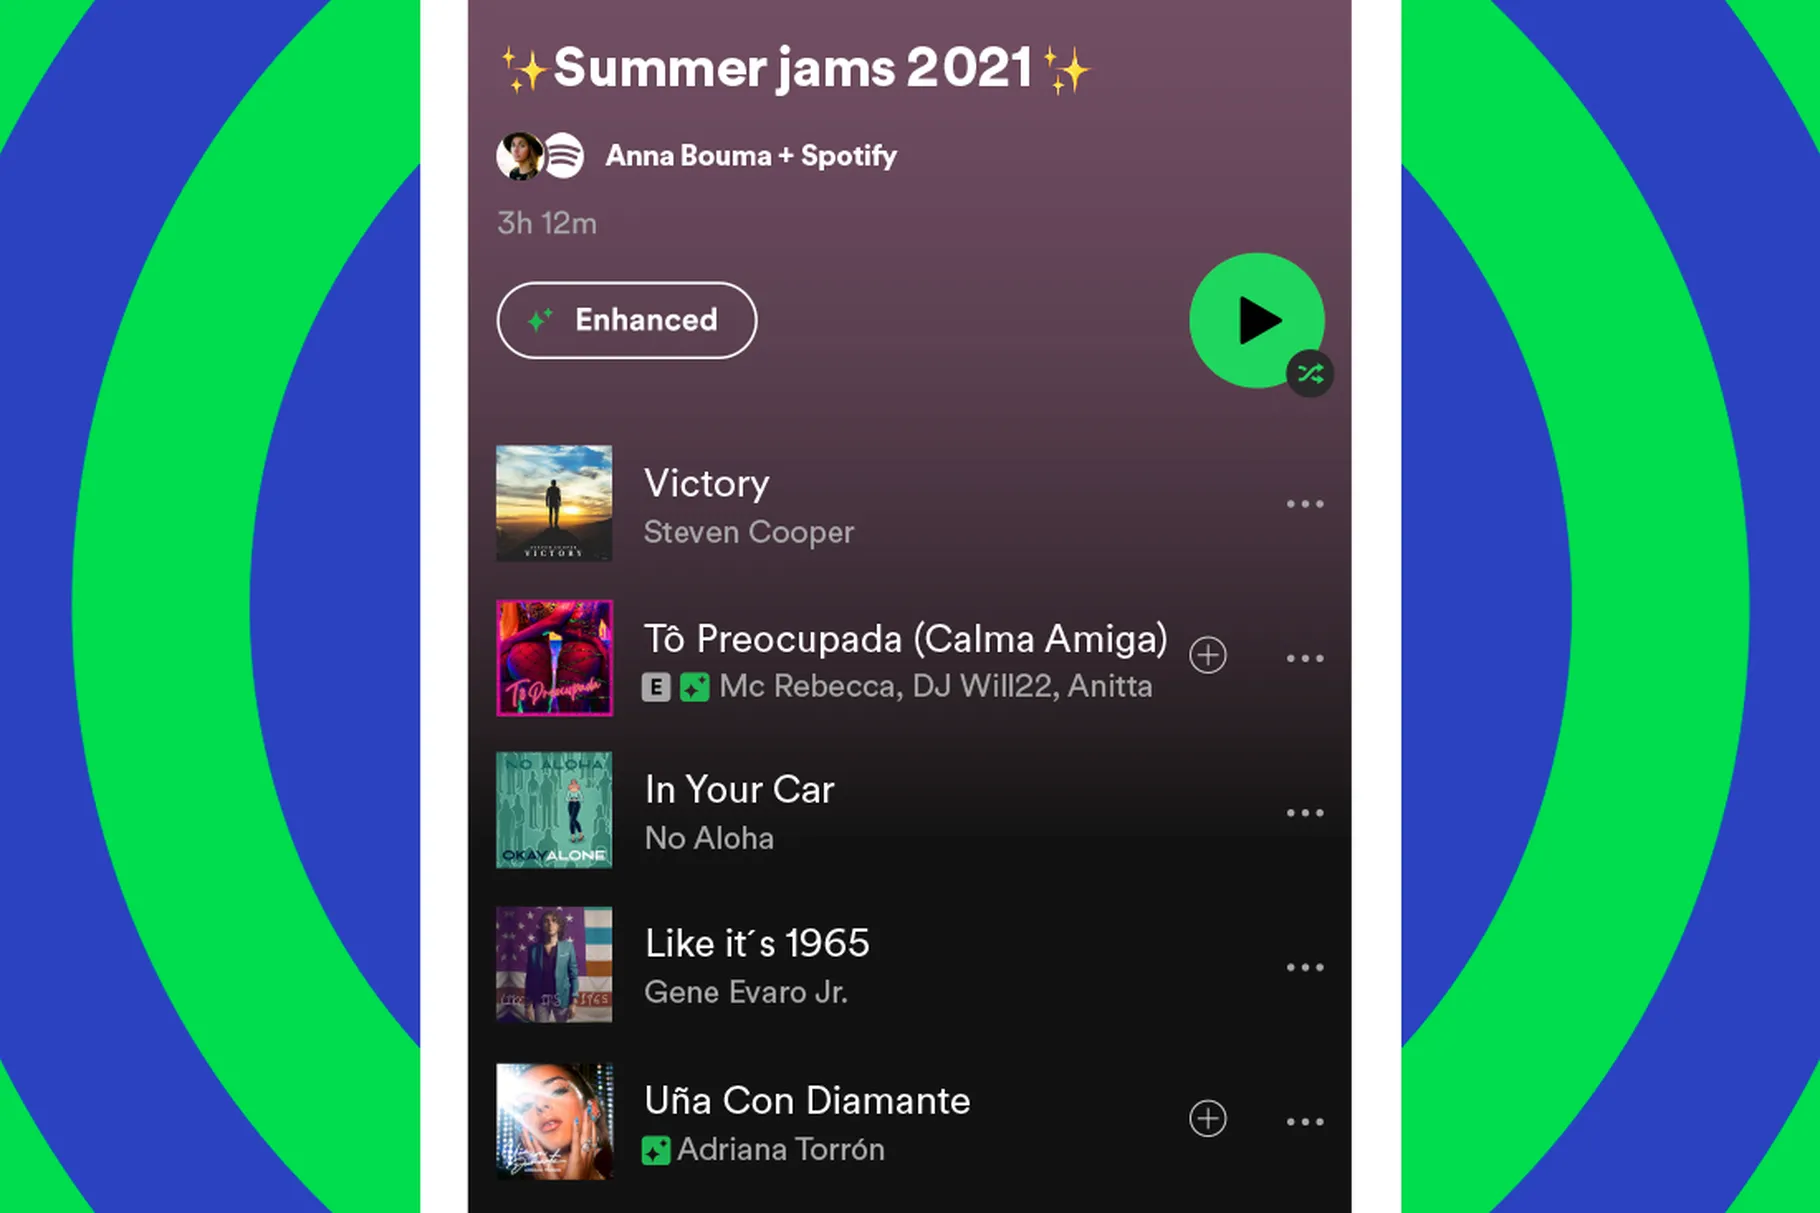 Spotify Rolling out a new feature to give Better Song Recommendations